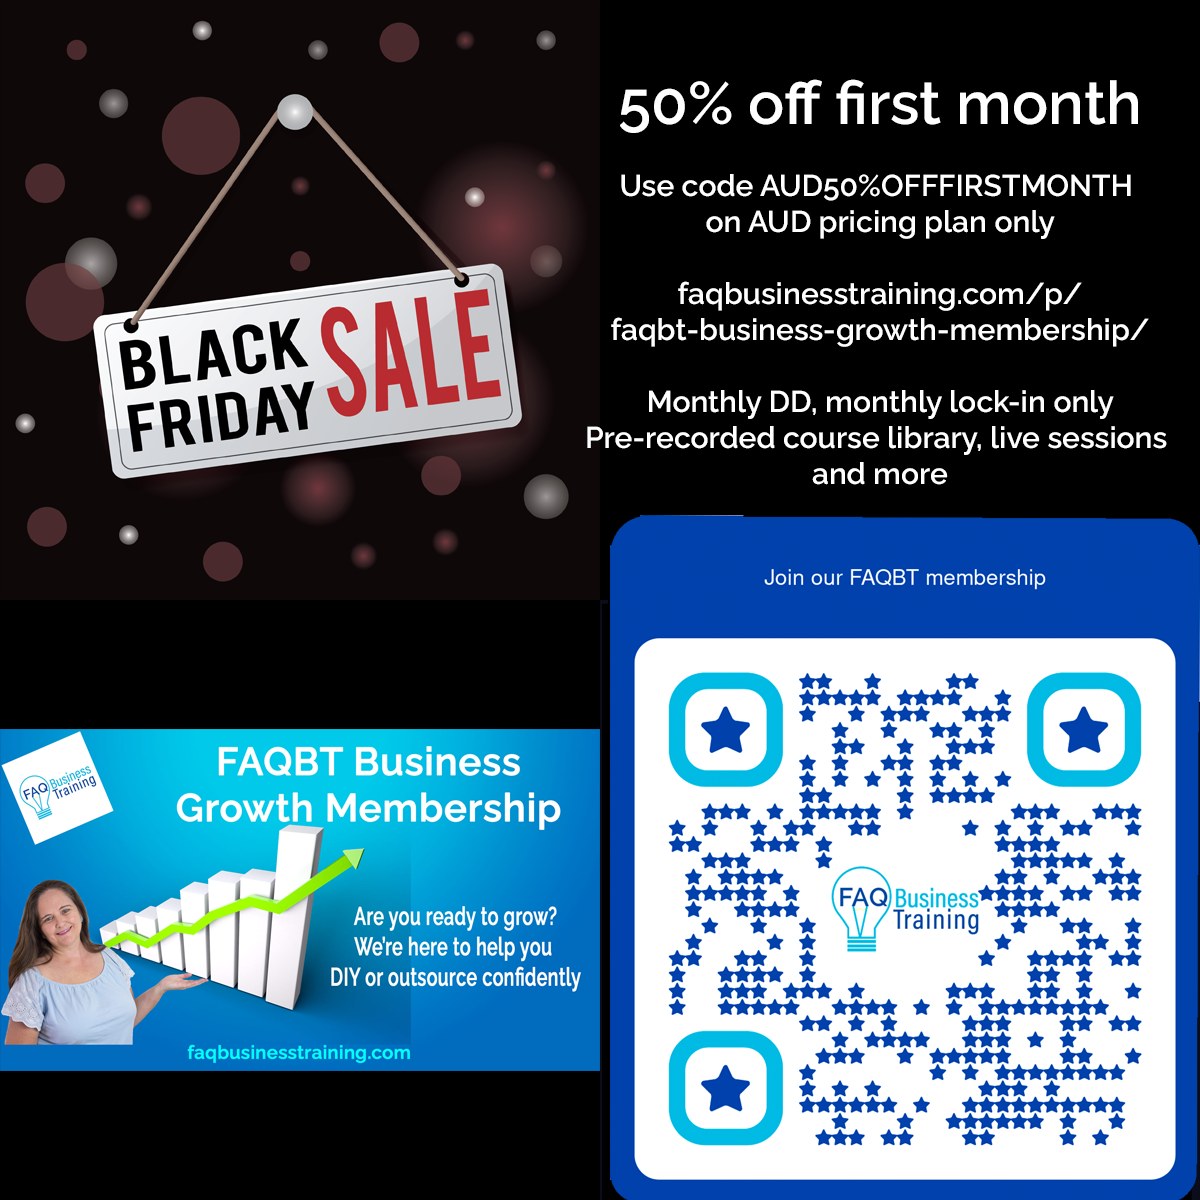 NSW Small Business Month 2022 and Black Friday Special